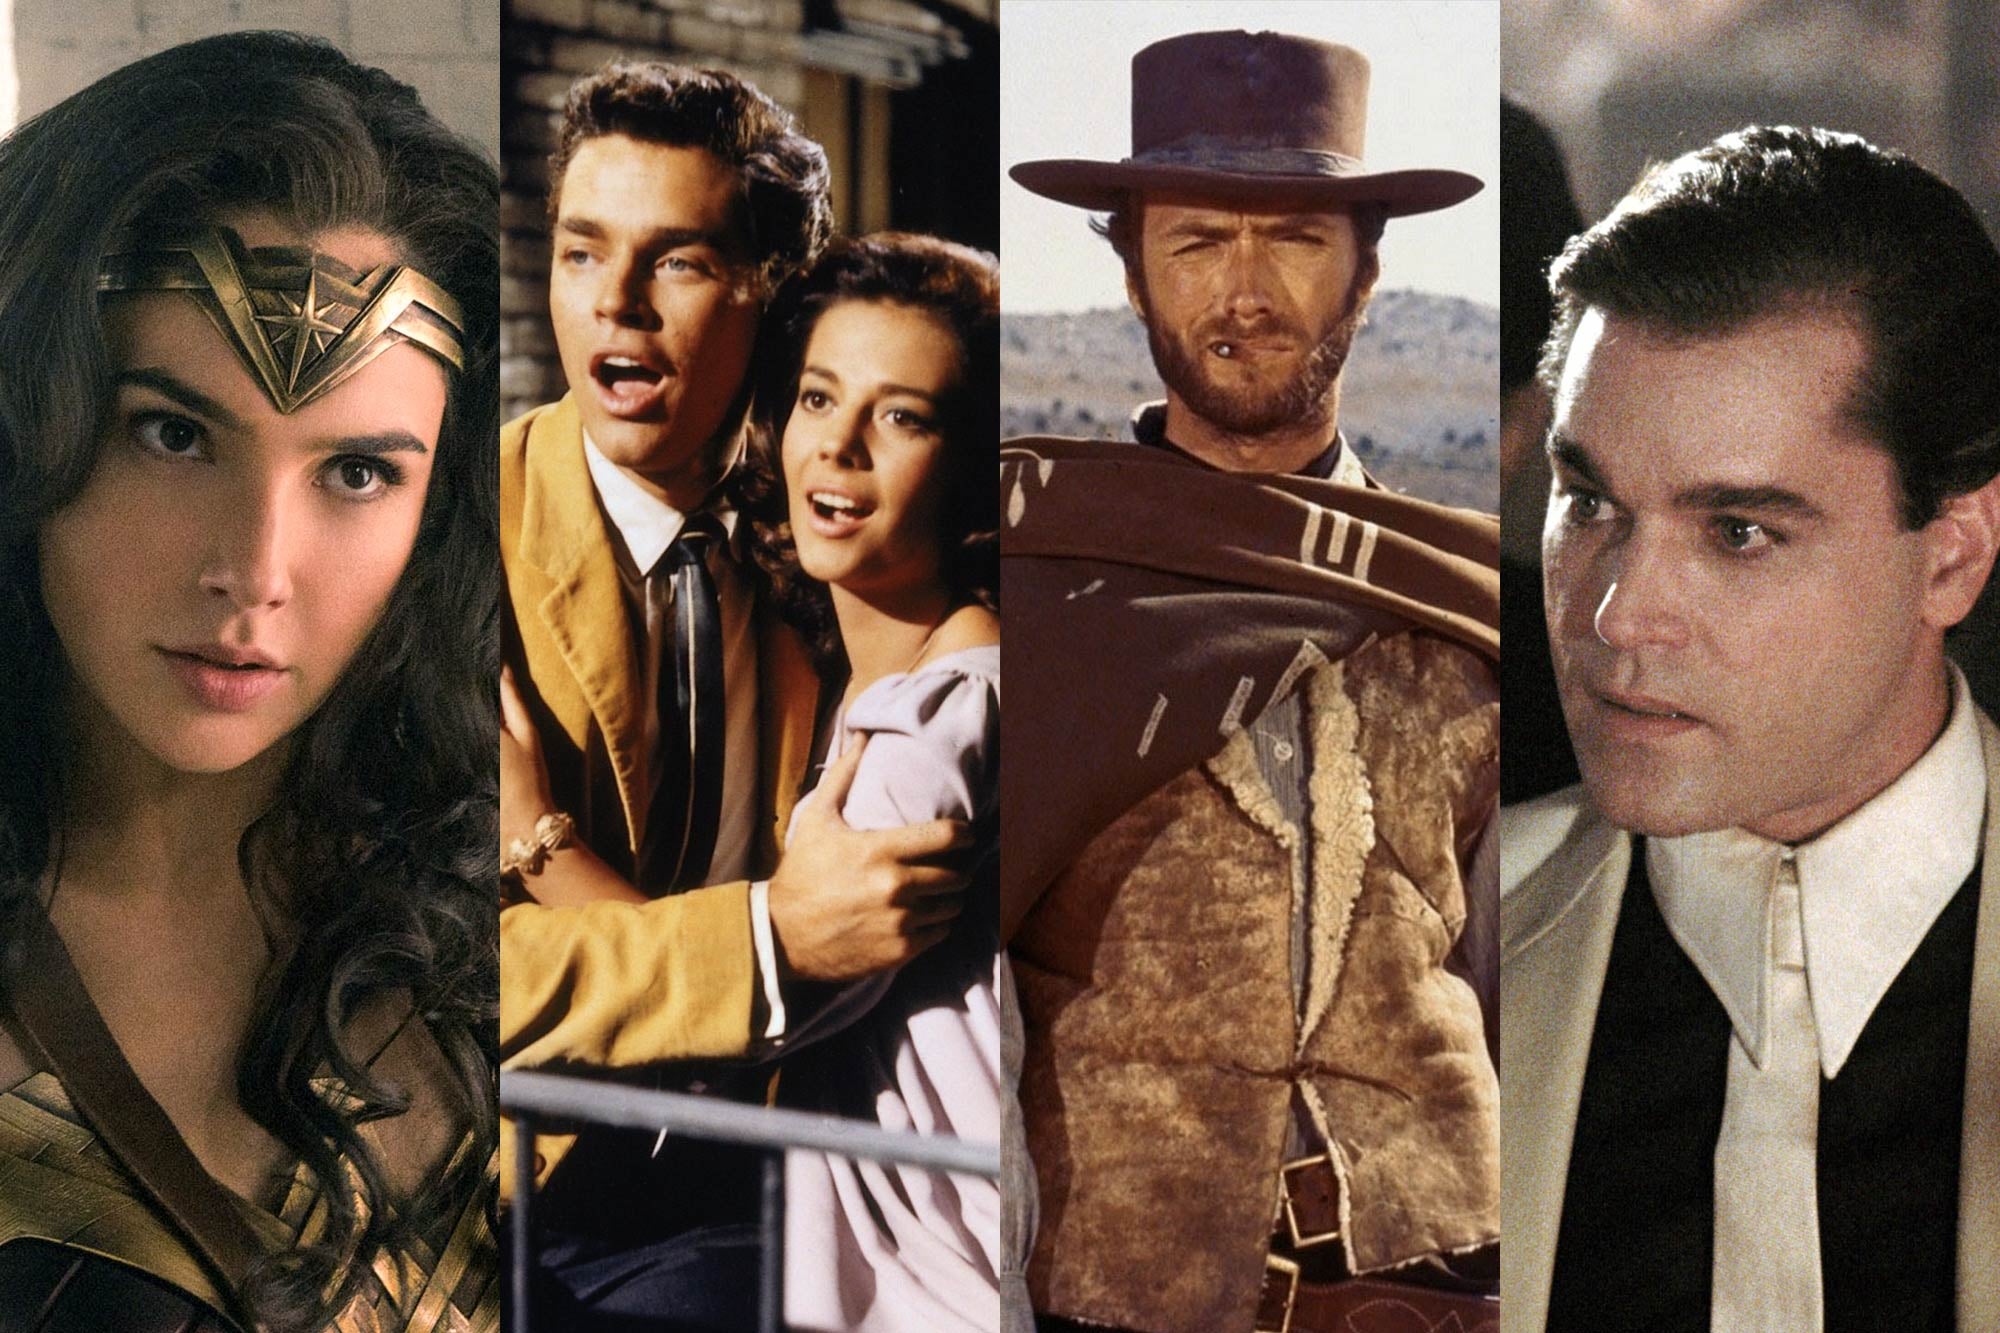 Wonder Woman, West Side Story, The Good, The Bad and the Ugly, GoodFellas.